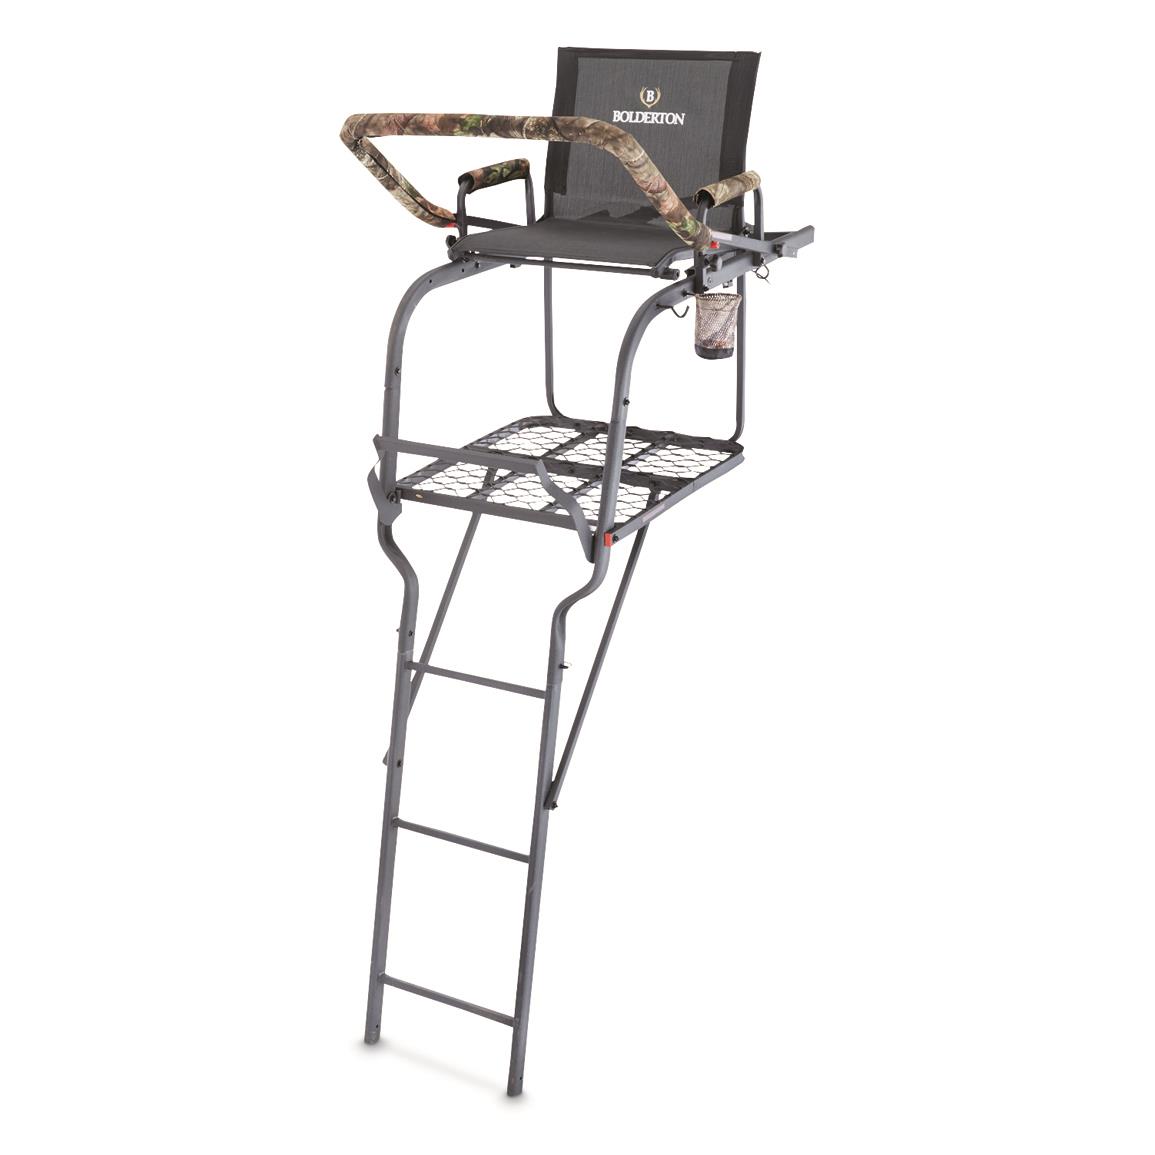 Guide Gear WX2-177426 Extreme Deluxe Hunting Climber Tree Stand for sale online 